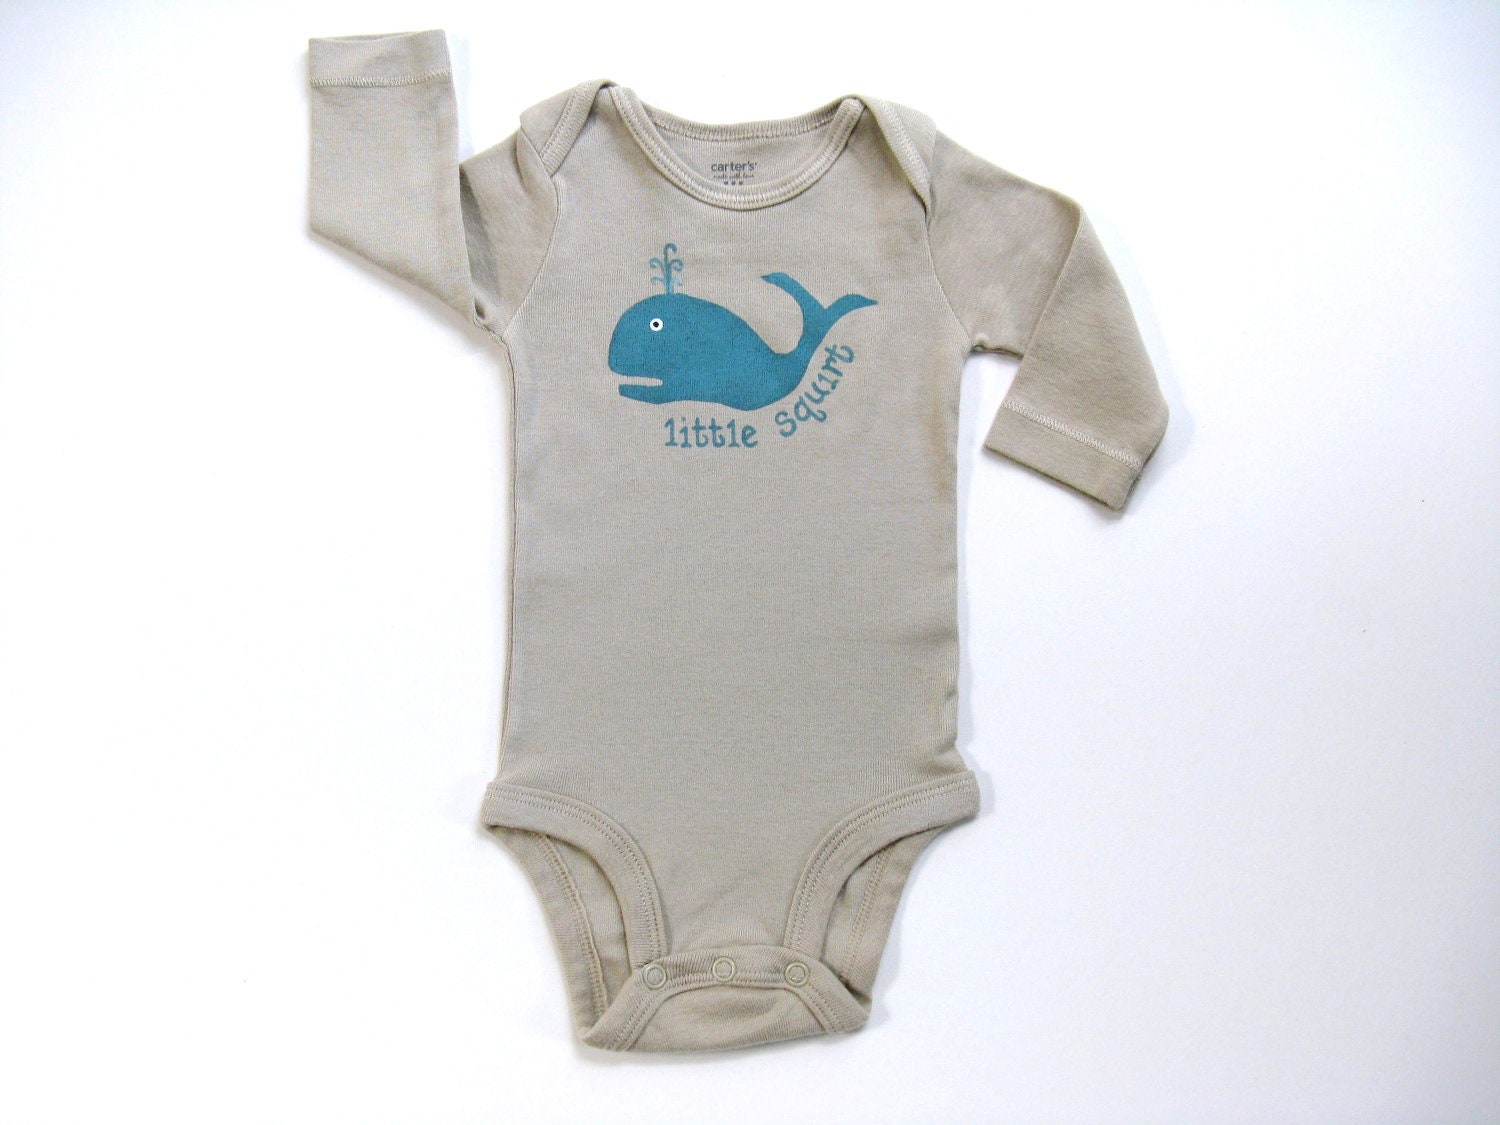 Boys Whale Bodysuit, Baby and Toddler, Hand Painted, One Piece or Romper, Long Sleeves - boygirlboygirldesign